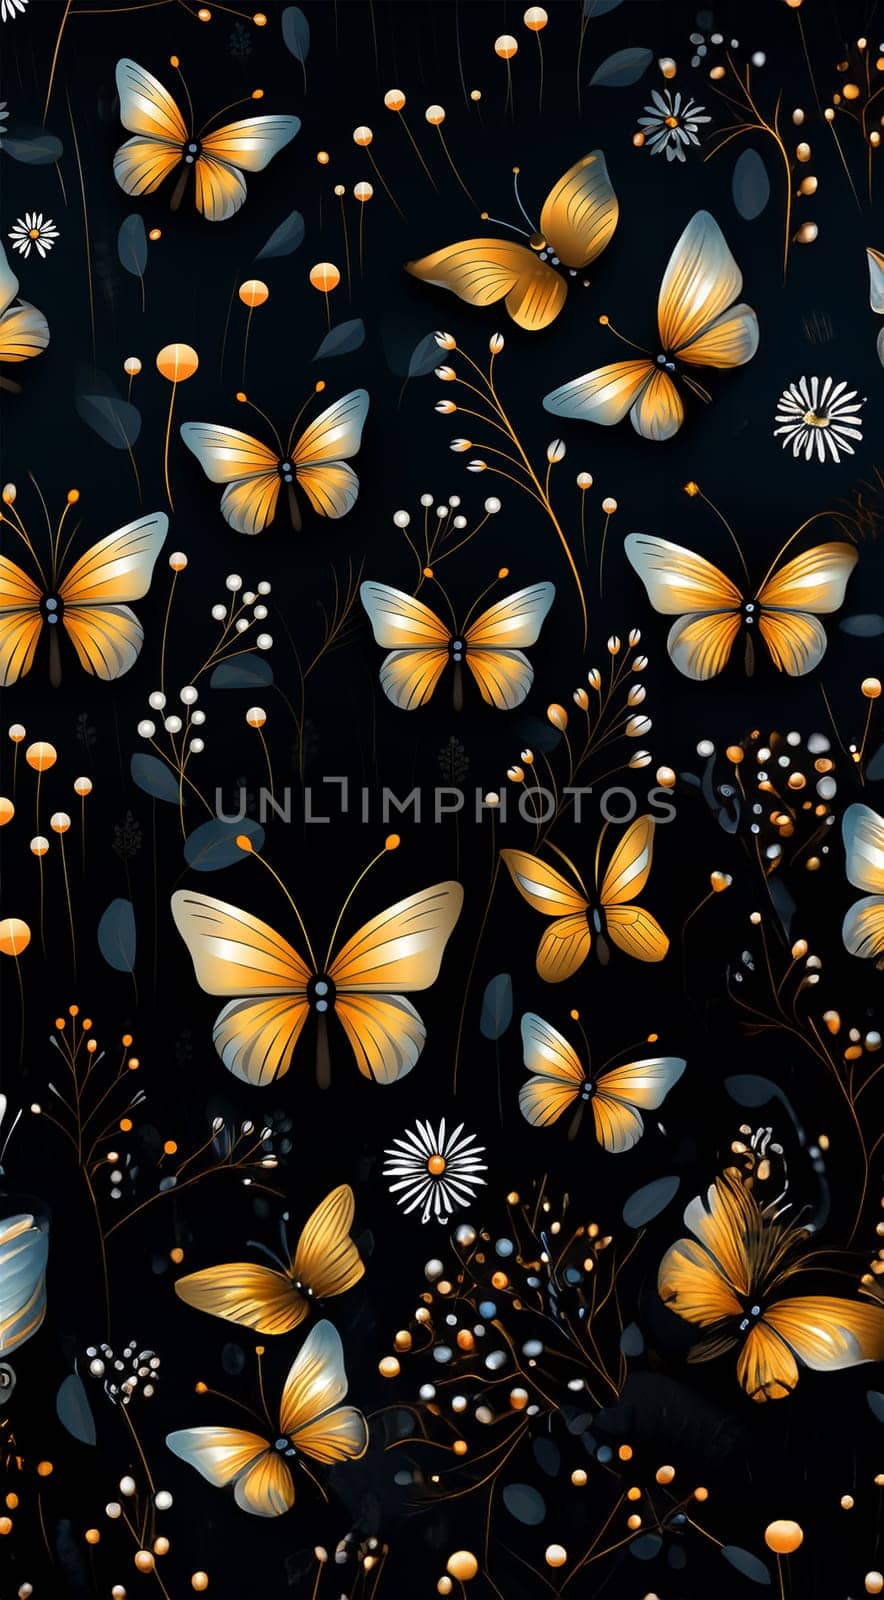 Cute wildflowers and night butterflies seamless pattern. Flowers and insects. art illustration. Navy blue background and gold foil printing. Dark floral pattern for textiles, paper, wallpapers. Orange and blue